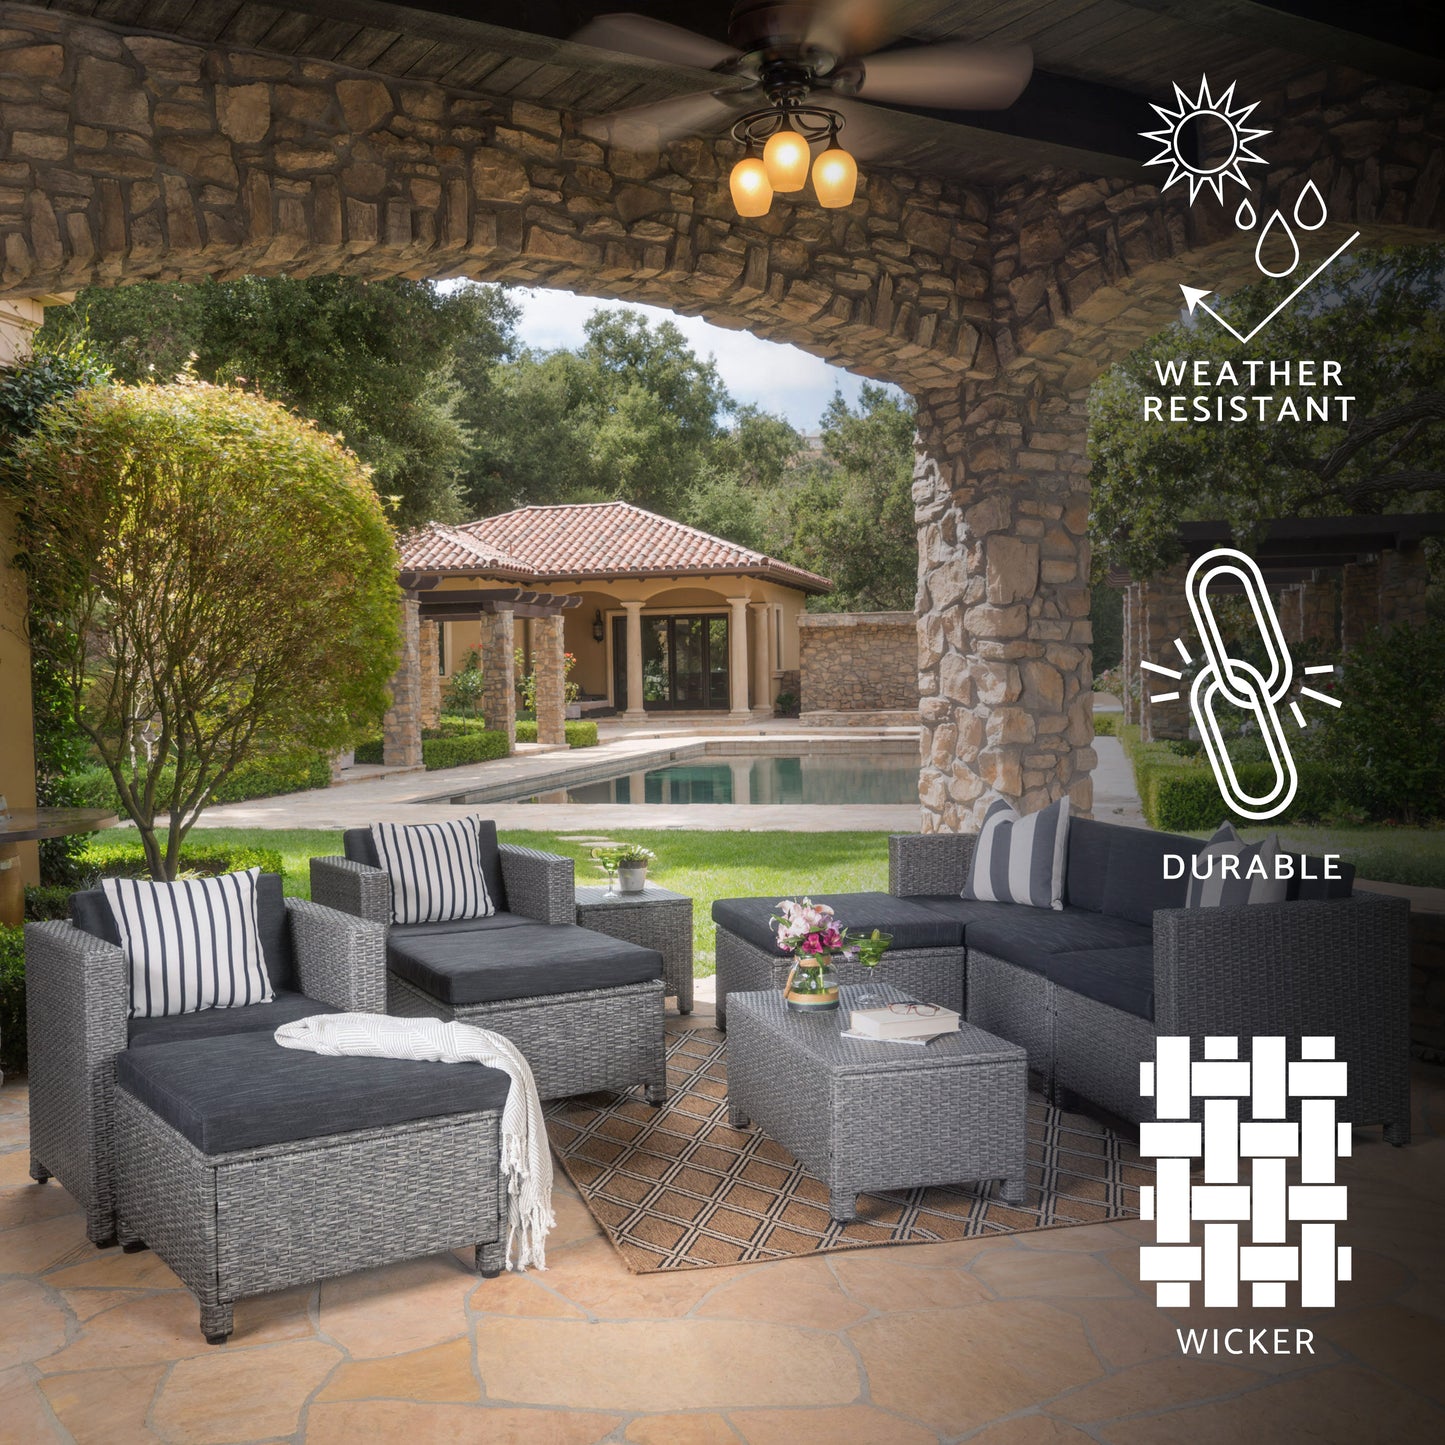 Feronia Outdoor 10 Piece Wicker Sofa Collection w/ Water Resistant Cushions